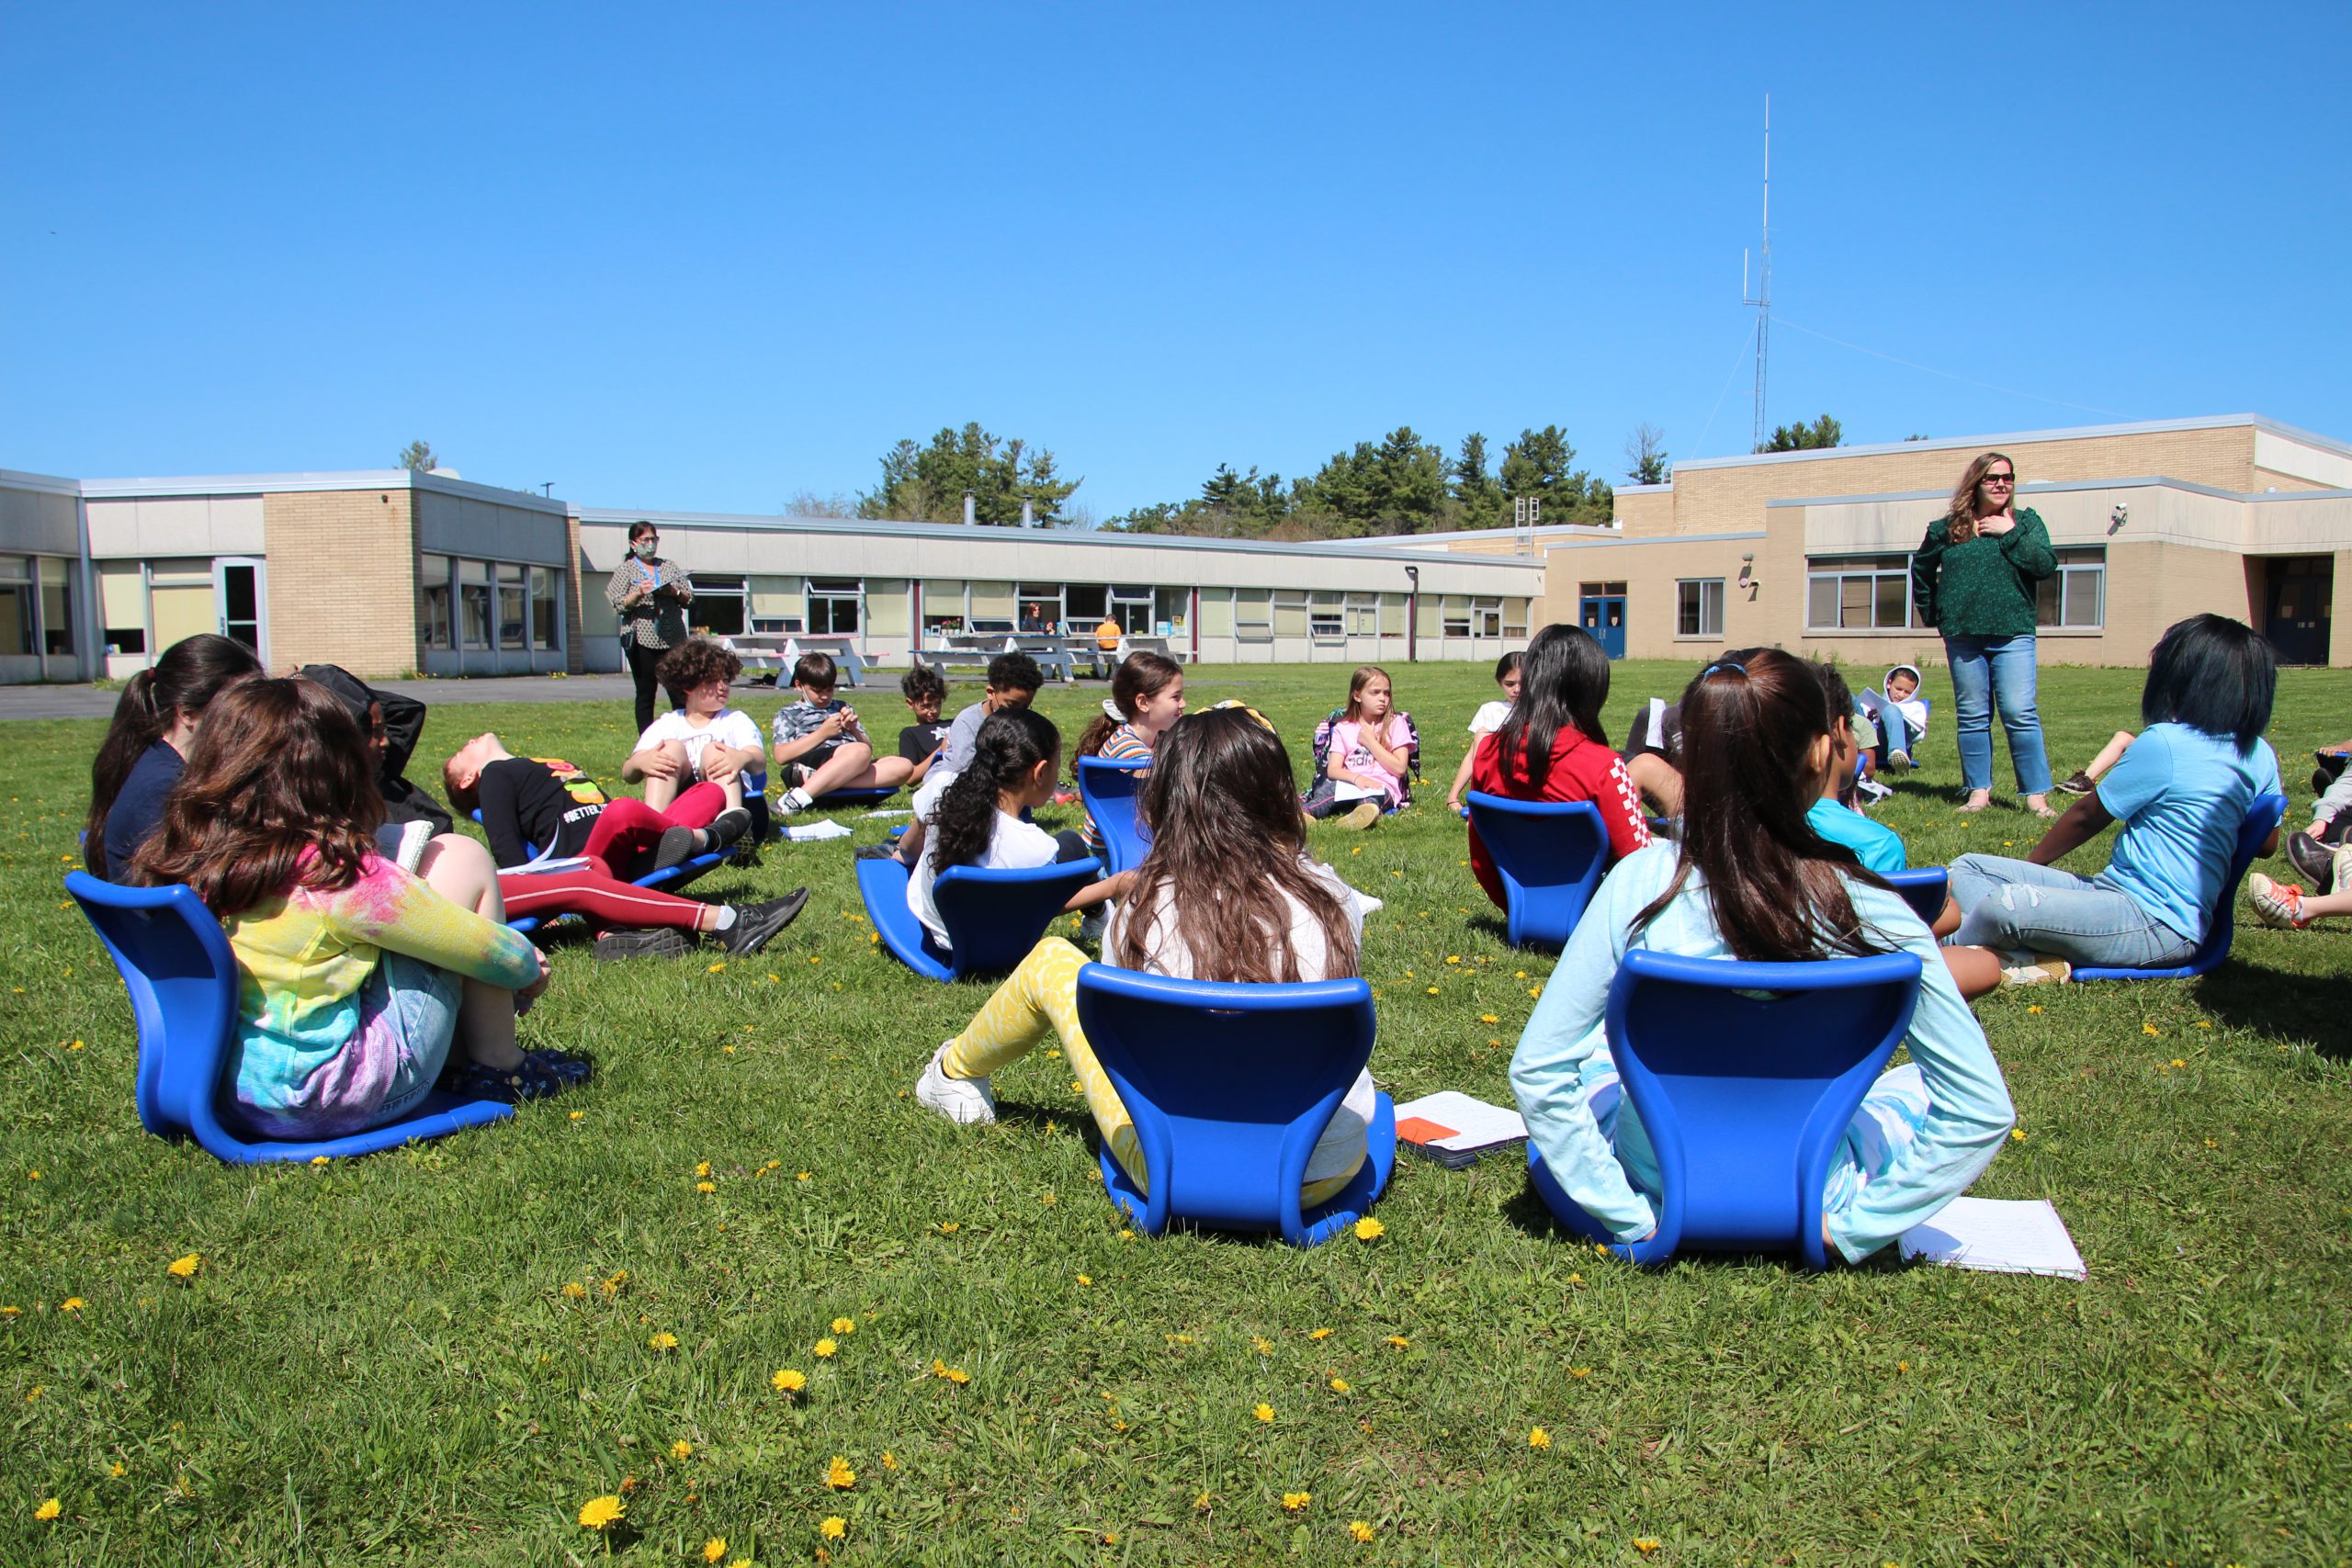 A class is sitting outside in blue chairs on the grass. They're watching their teacher as she speaks.